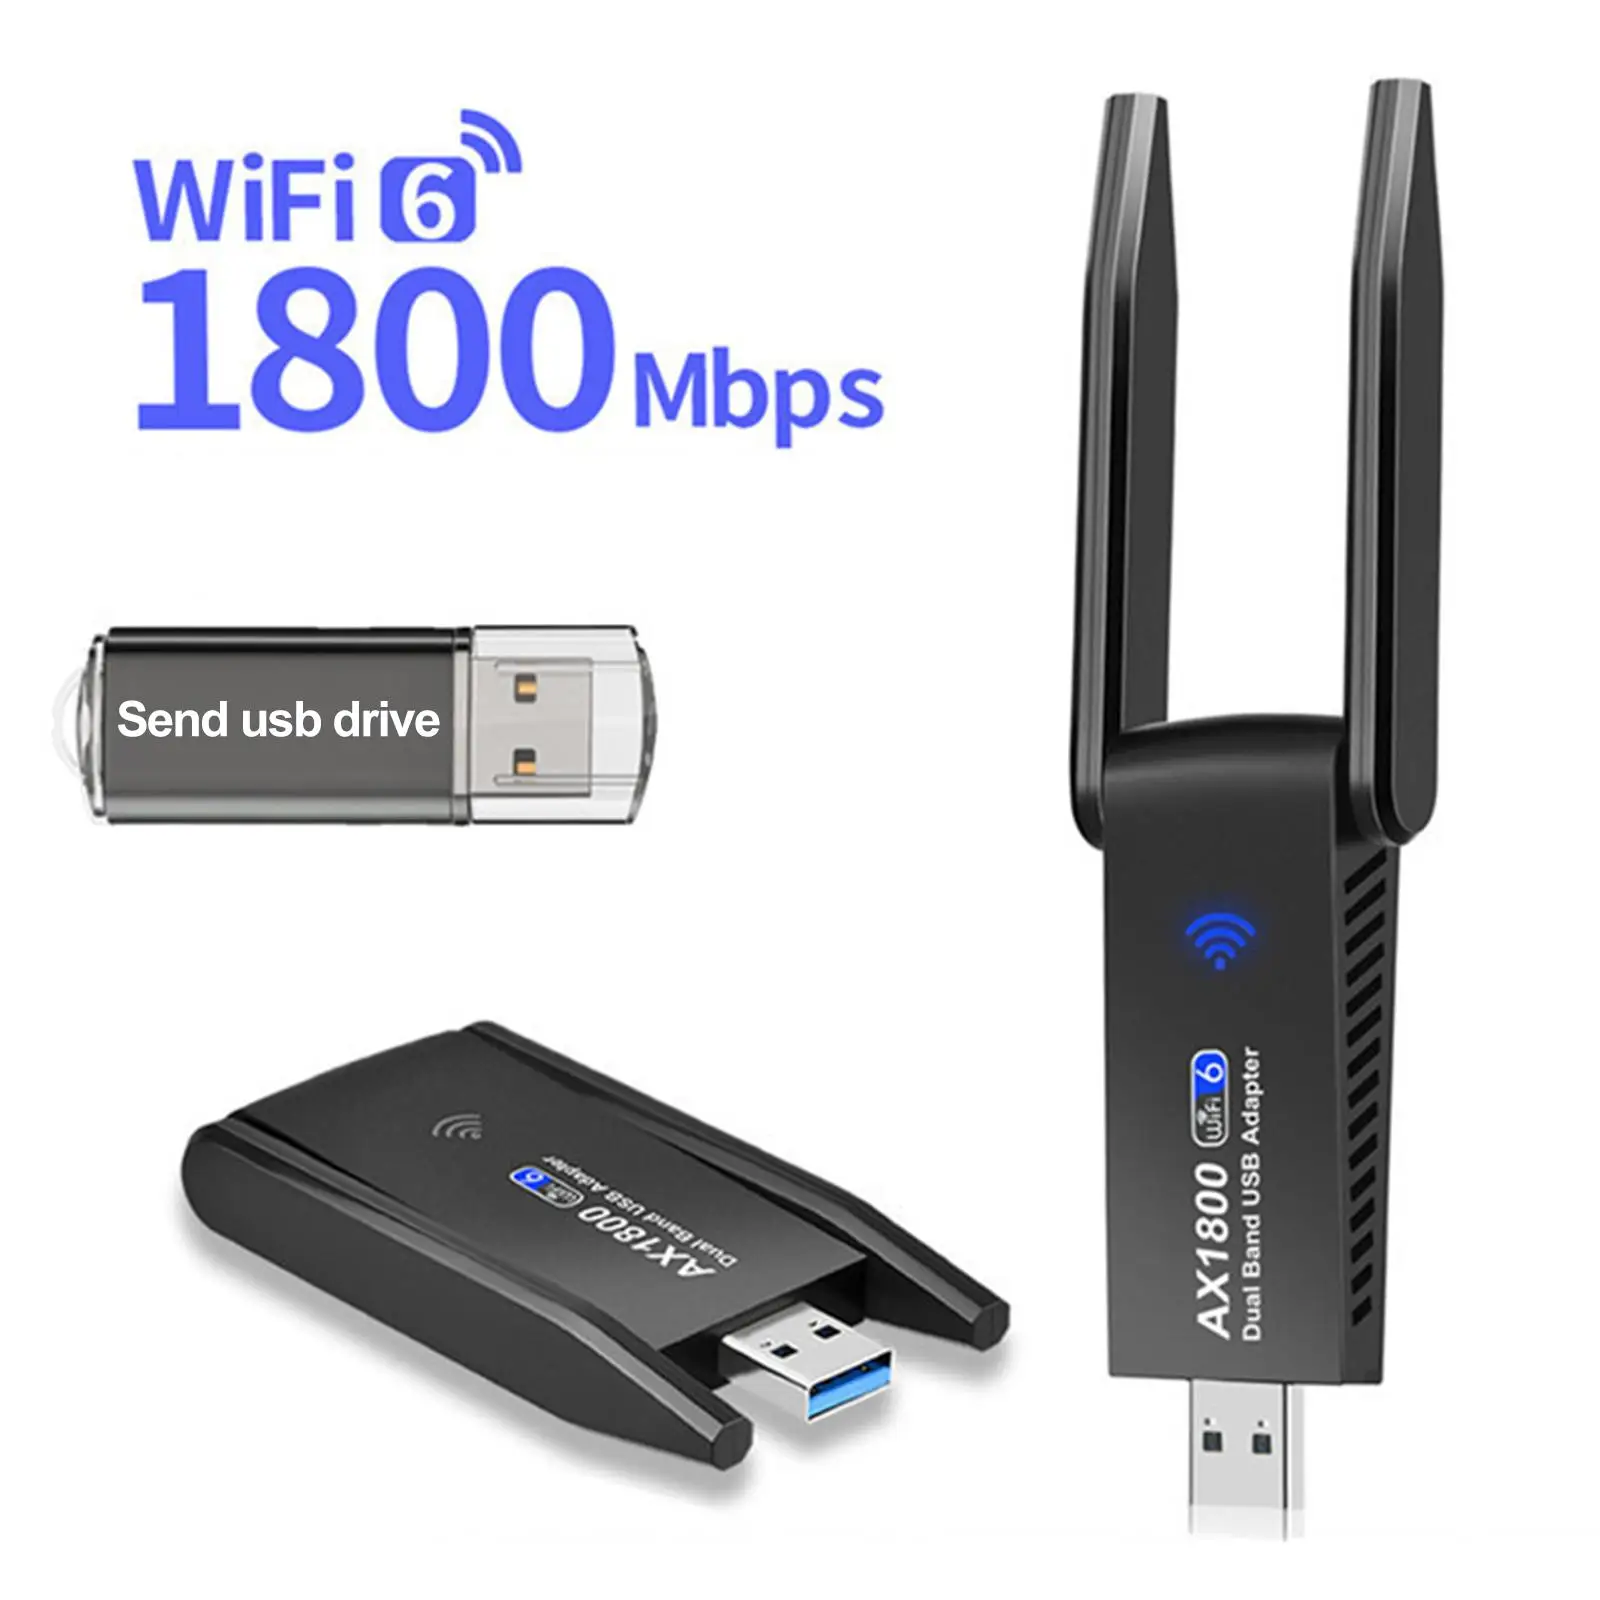 USB WiFi Adapter, 1800Mbps for Win11/10/7 2.4GHz/5GHz IEEE802.11AX WiFi 6 Wireless Network Adapter for Gaming Laptop PC